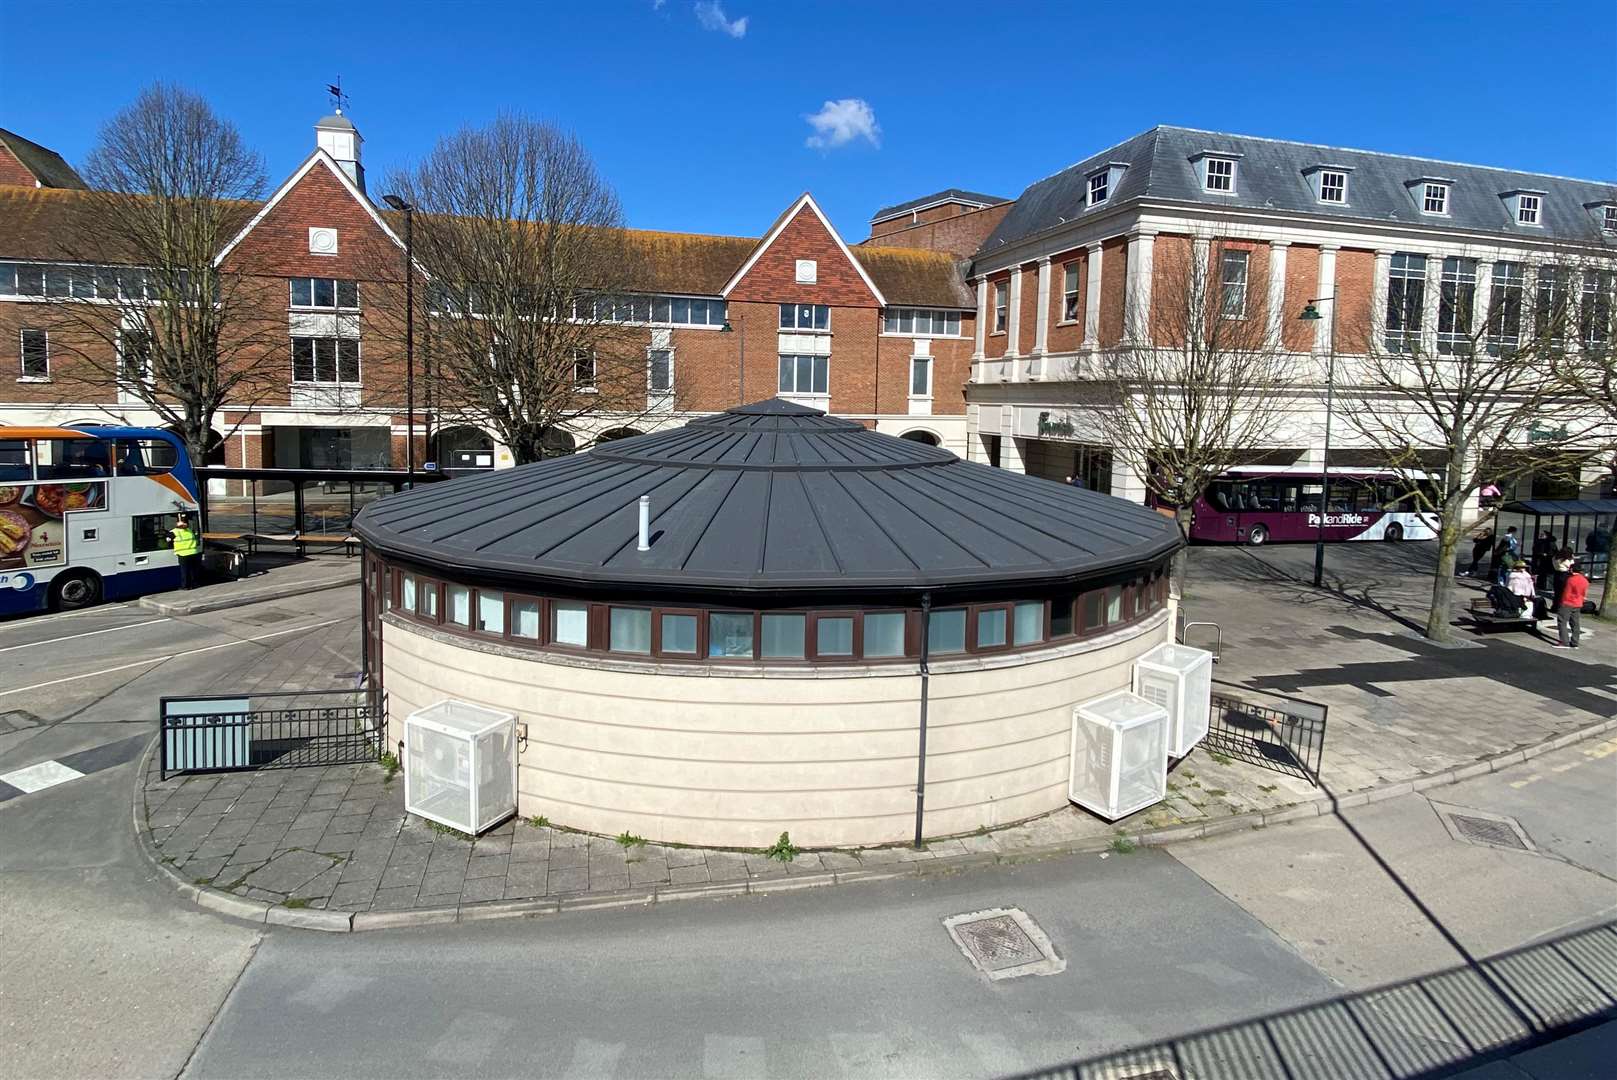 Plans have been unveiled to transform the Canterbury bus station building into a 28-seat venue